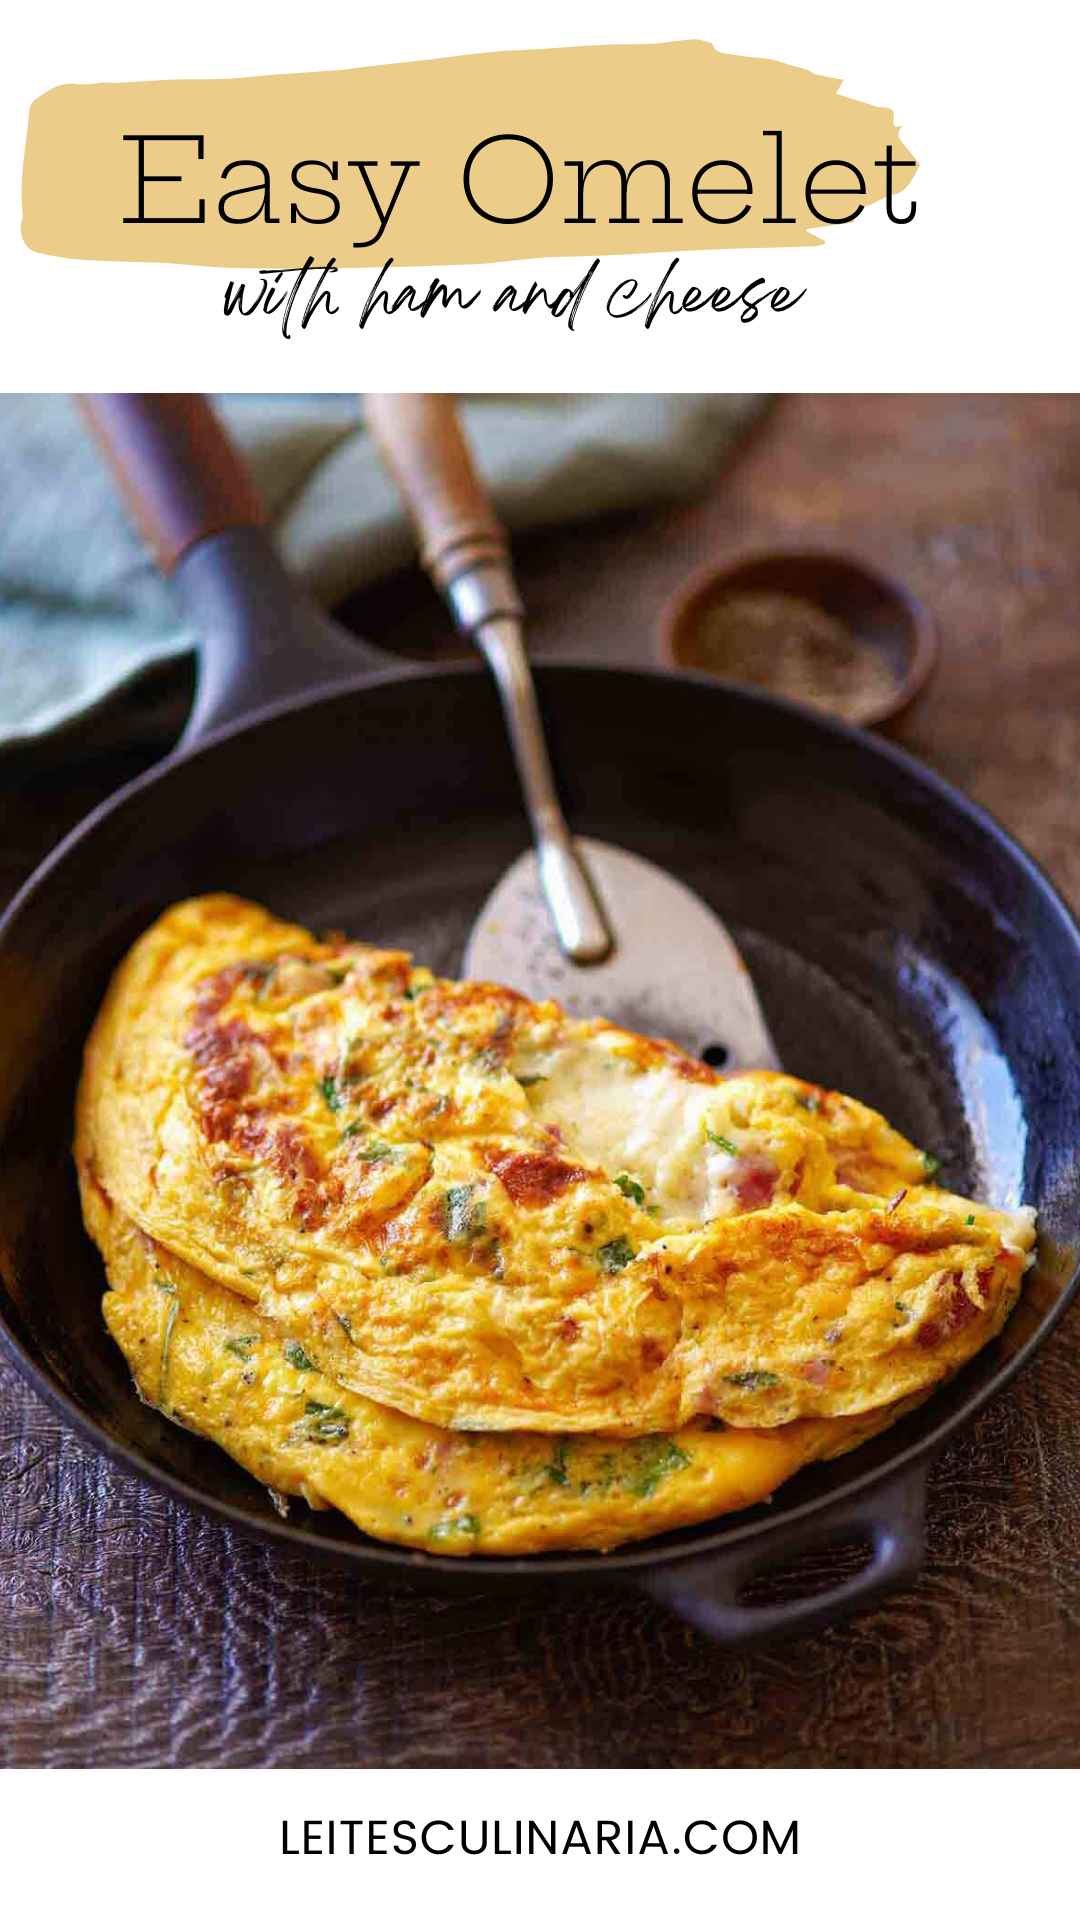 A folded ham and cheese omelet in a skillet with a spatula lifting it.